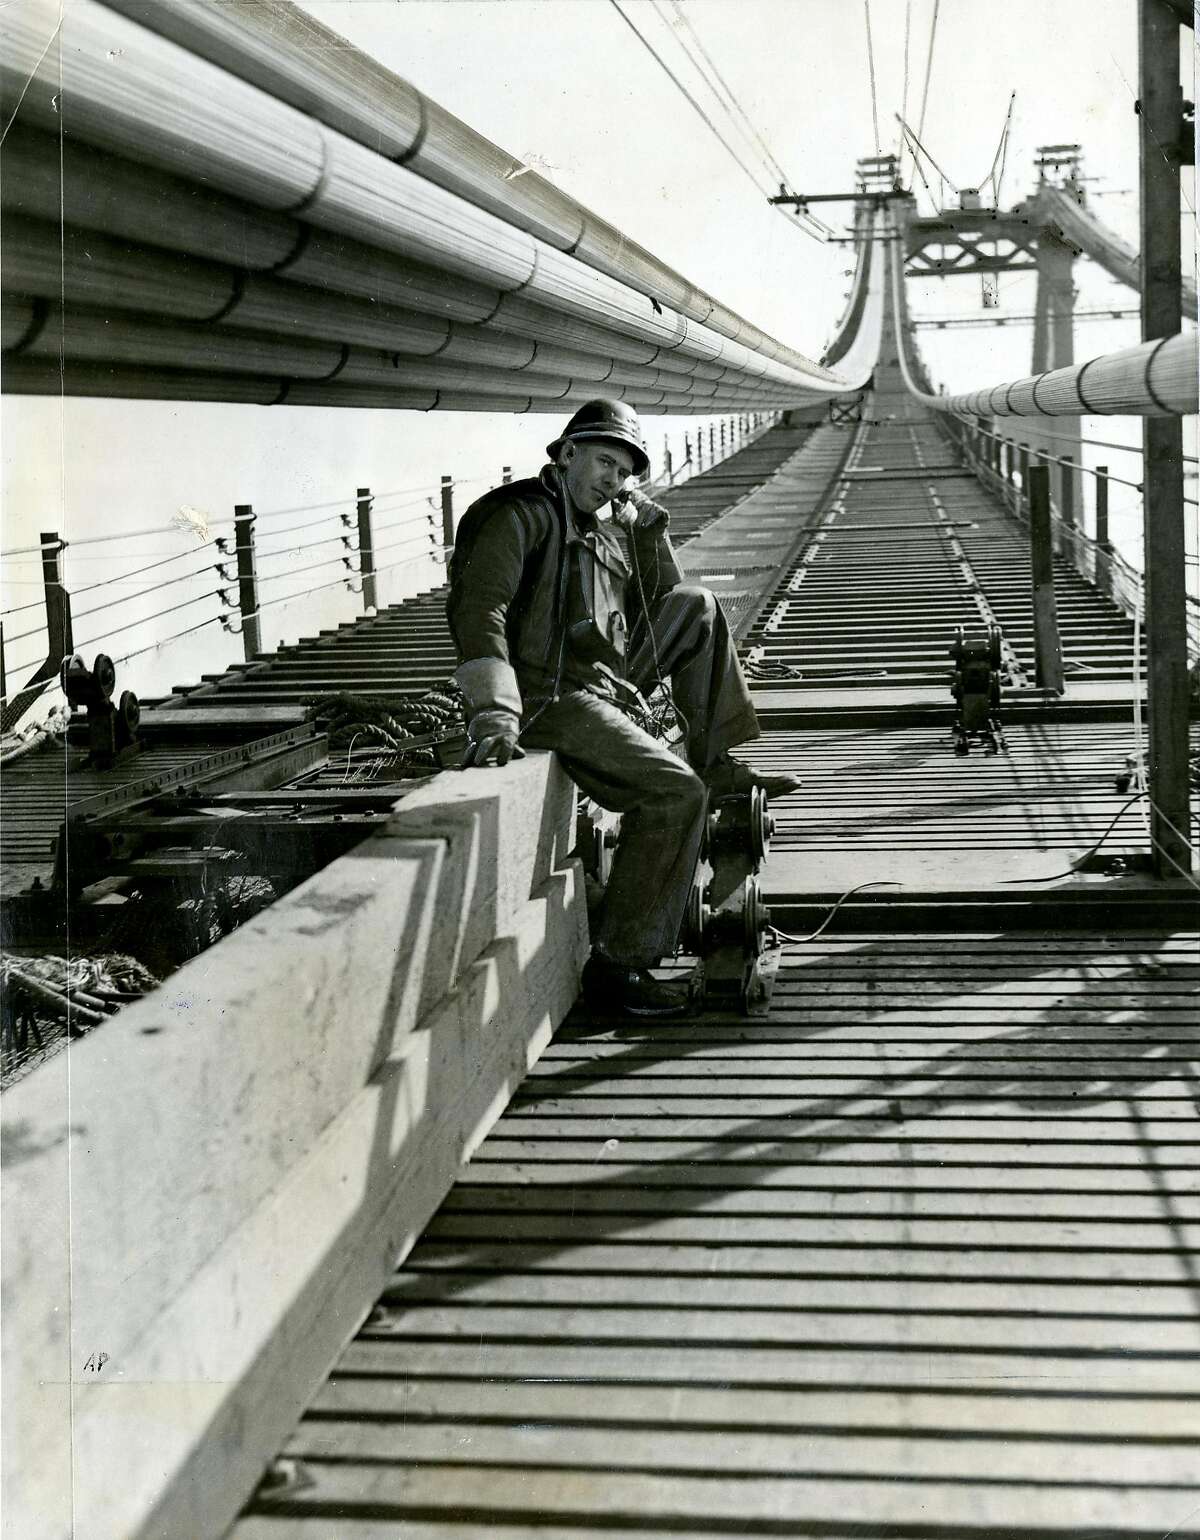 Golden Gate Bridge construction worker on March 19, 1936. Courtesy of the Associated Press.